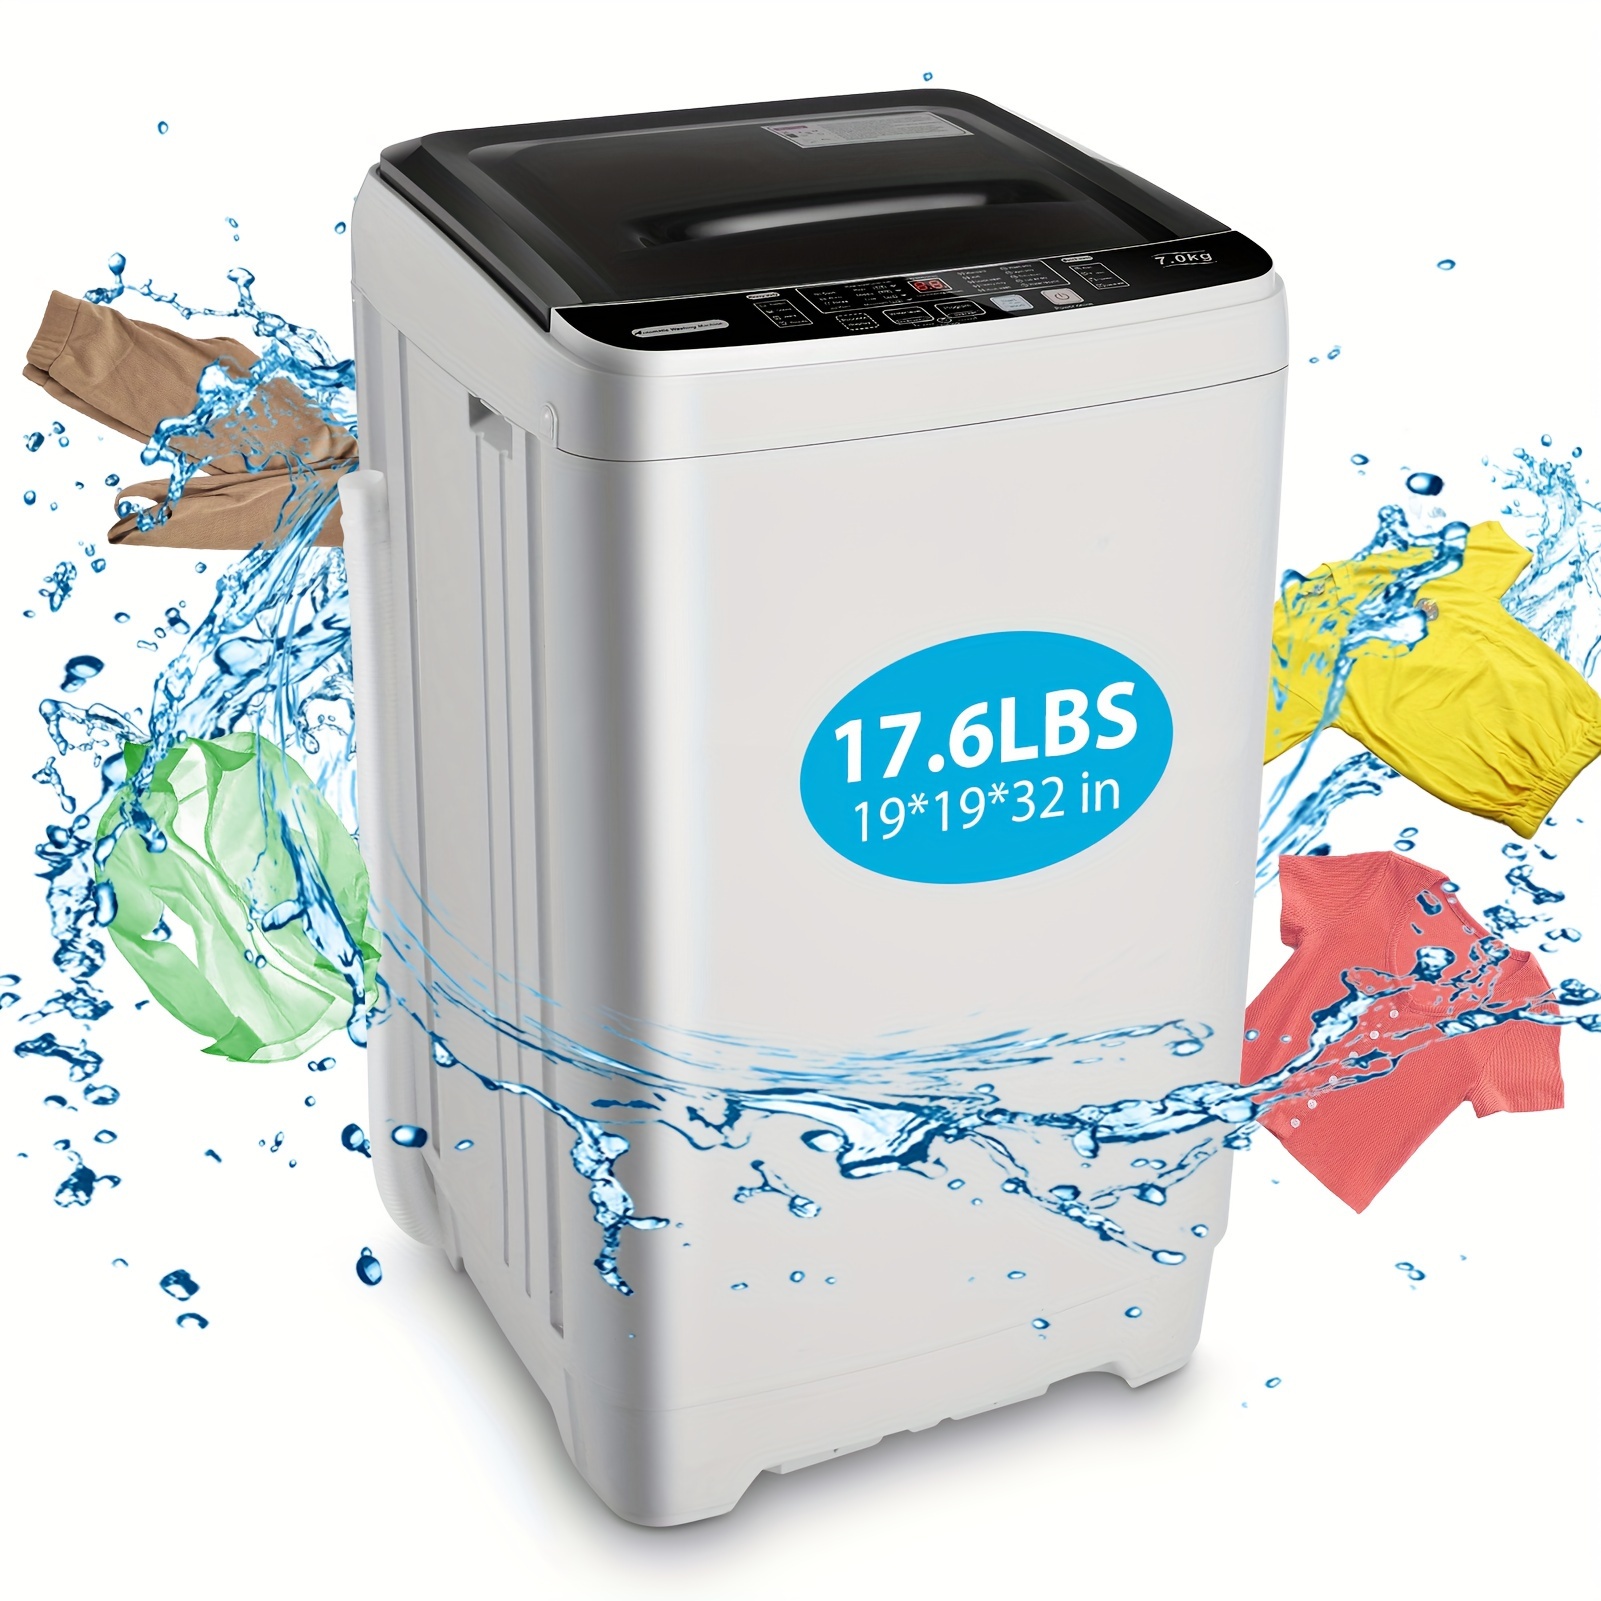 

17.6lbs - 2.3cu.ft Full-automatic Compact Washer With 10 Programs & 8 Water Levels, Perfect For Apartments, Dormitories